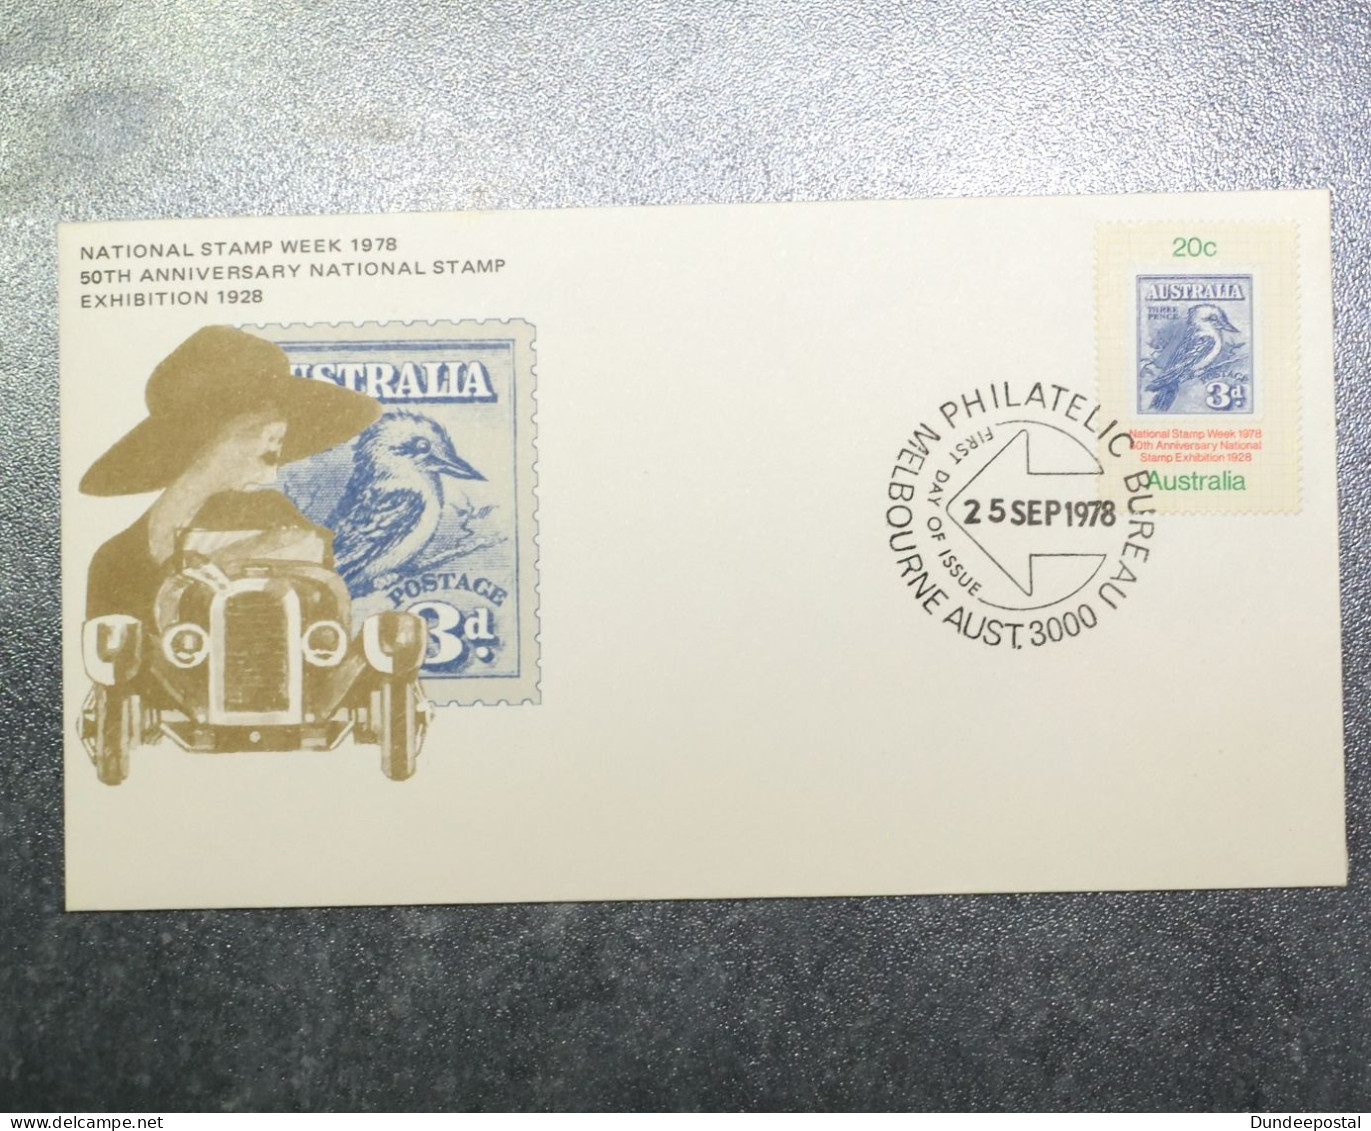 AUSTRALIA  First Day Cover  Stamp Week Single 1978  ~~L@@K~~ - Covers & Documents